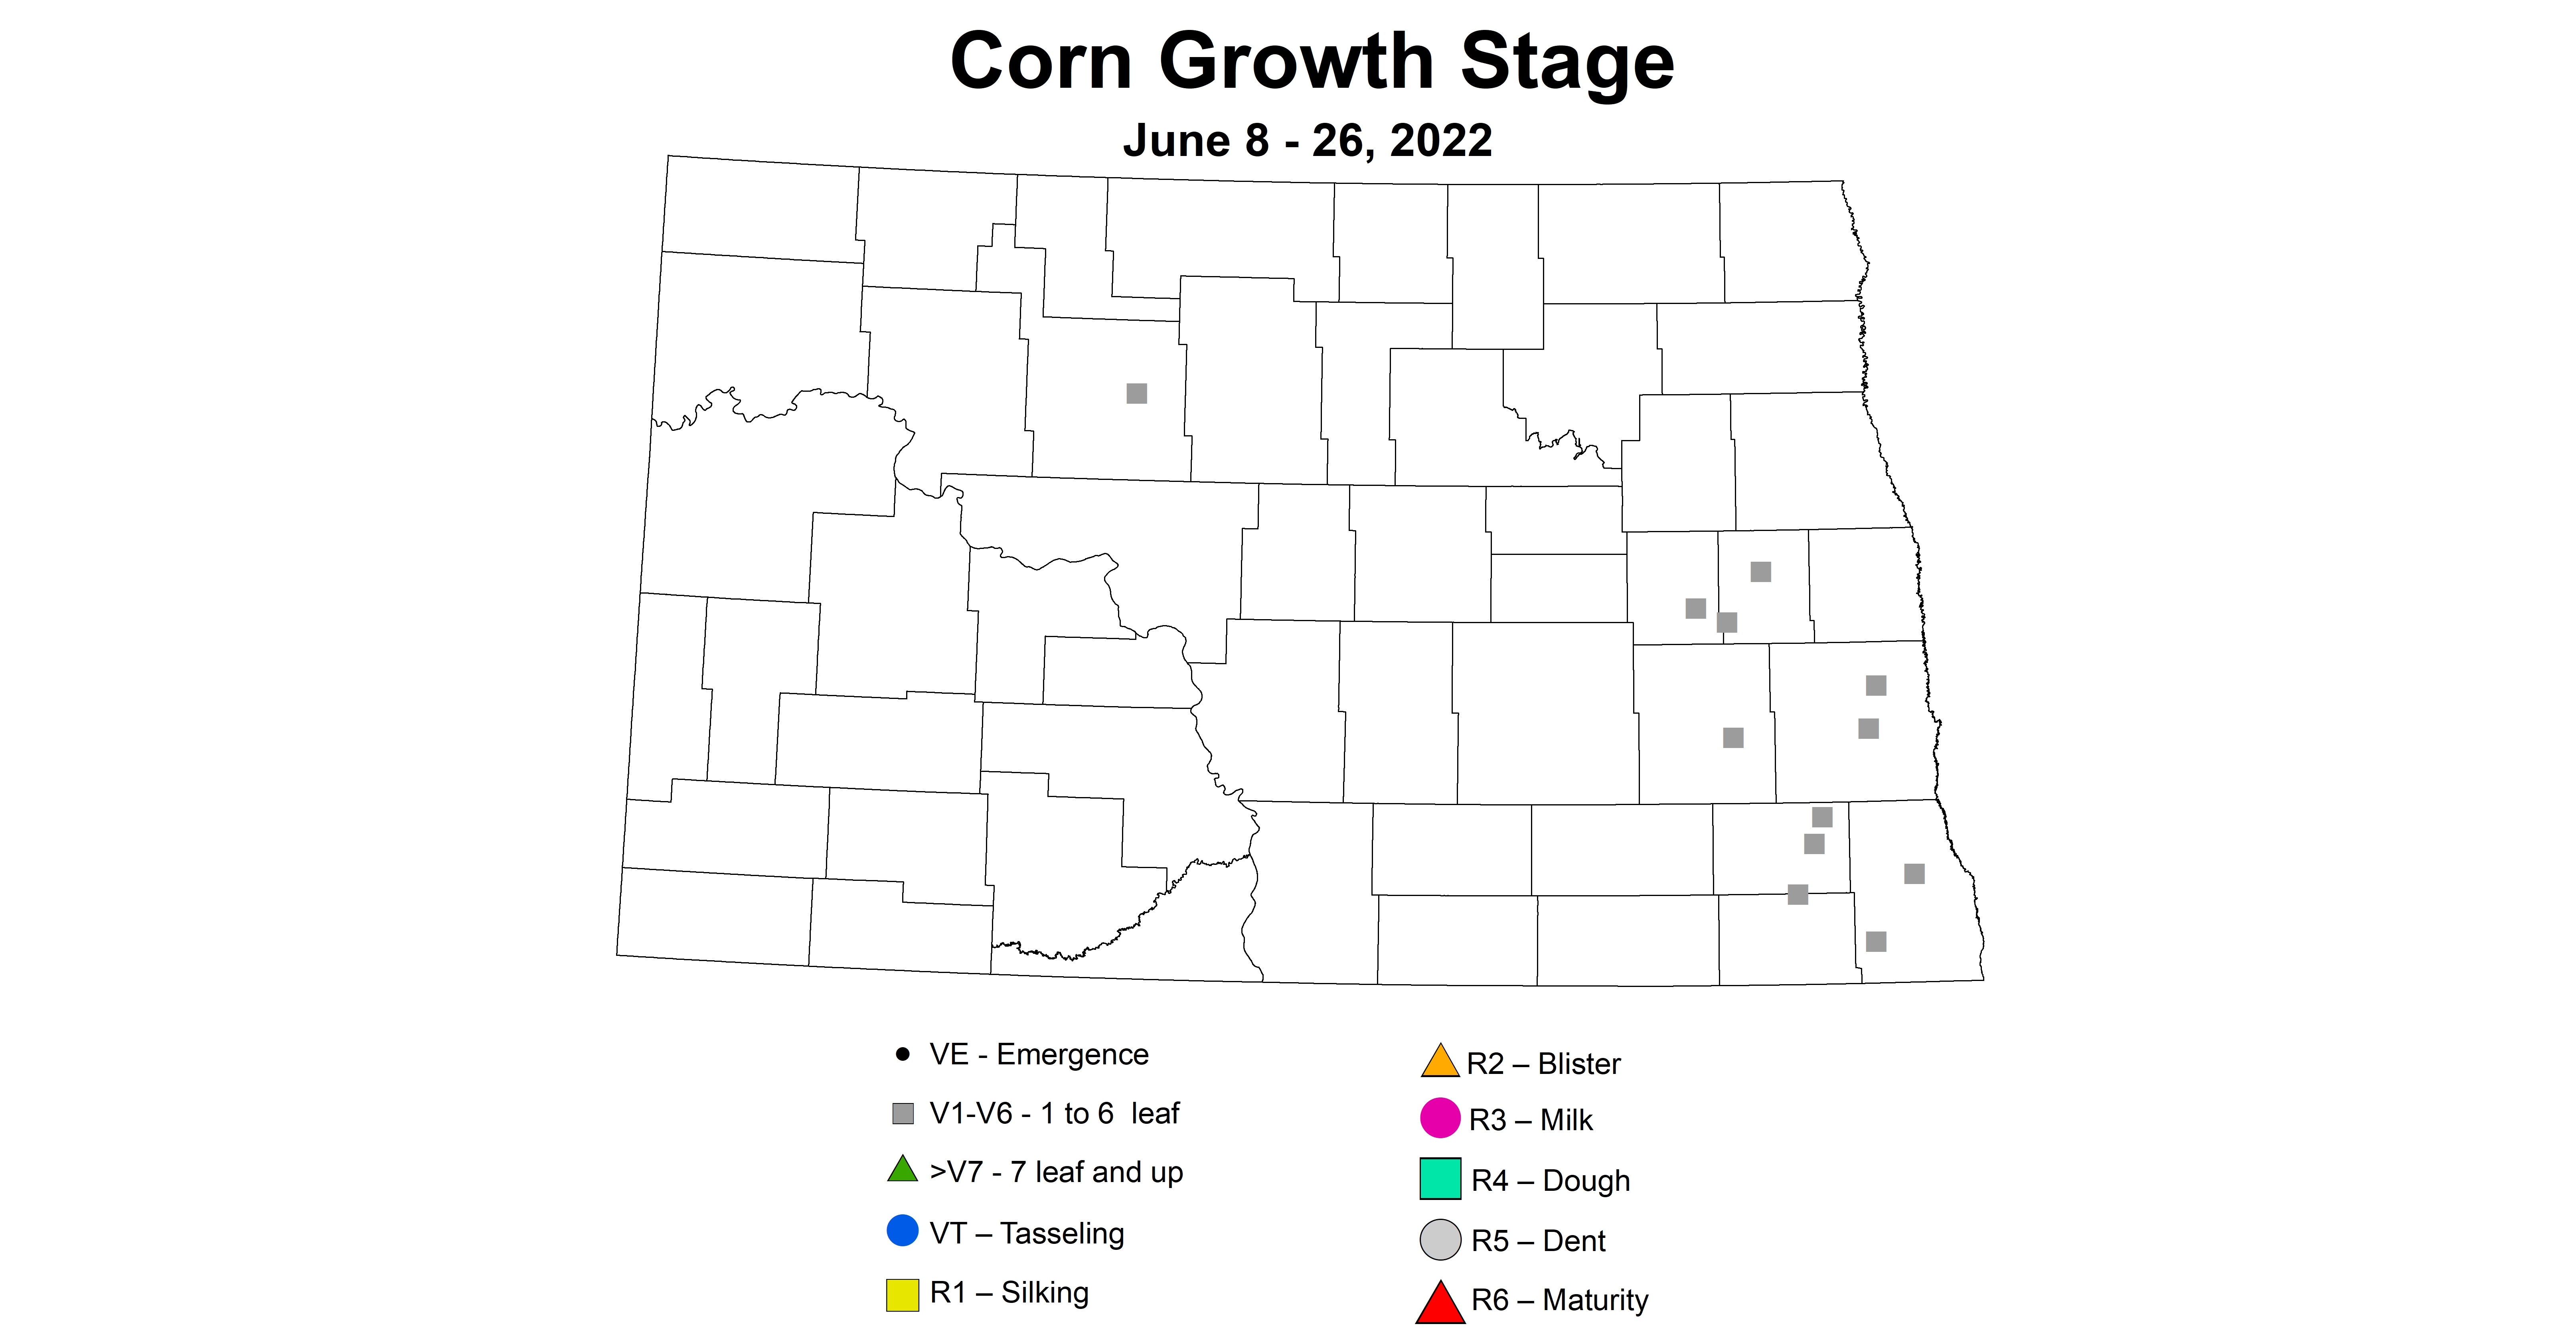 ND IPM map of corn growth stages June 8 - 26